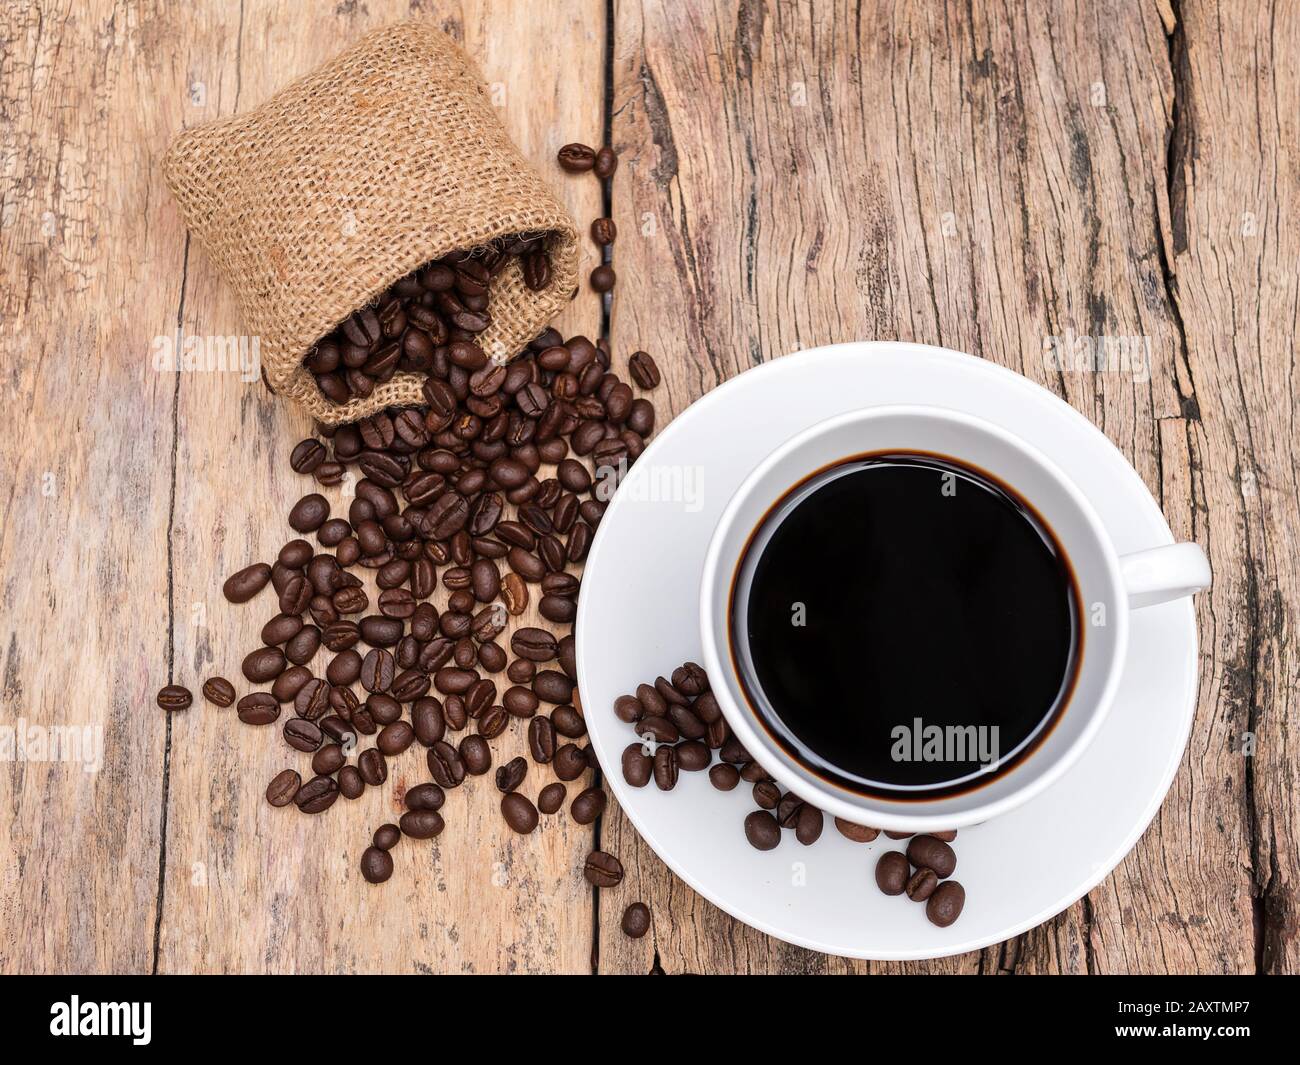 fresh espresso coffee cup with coffee bean on wooden table. coffee background for cafe or coffee shop Stock Photo